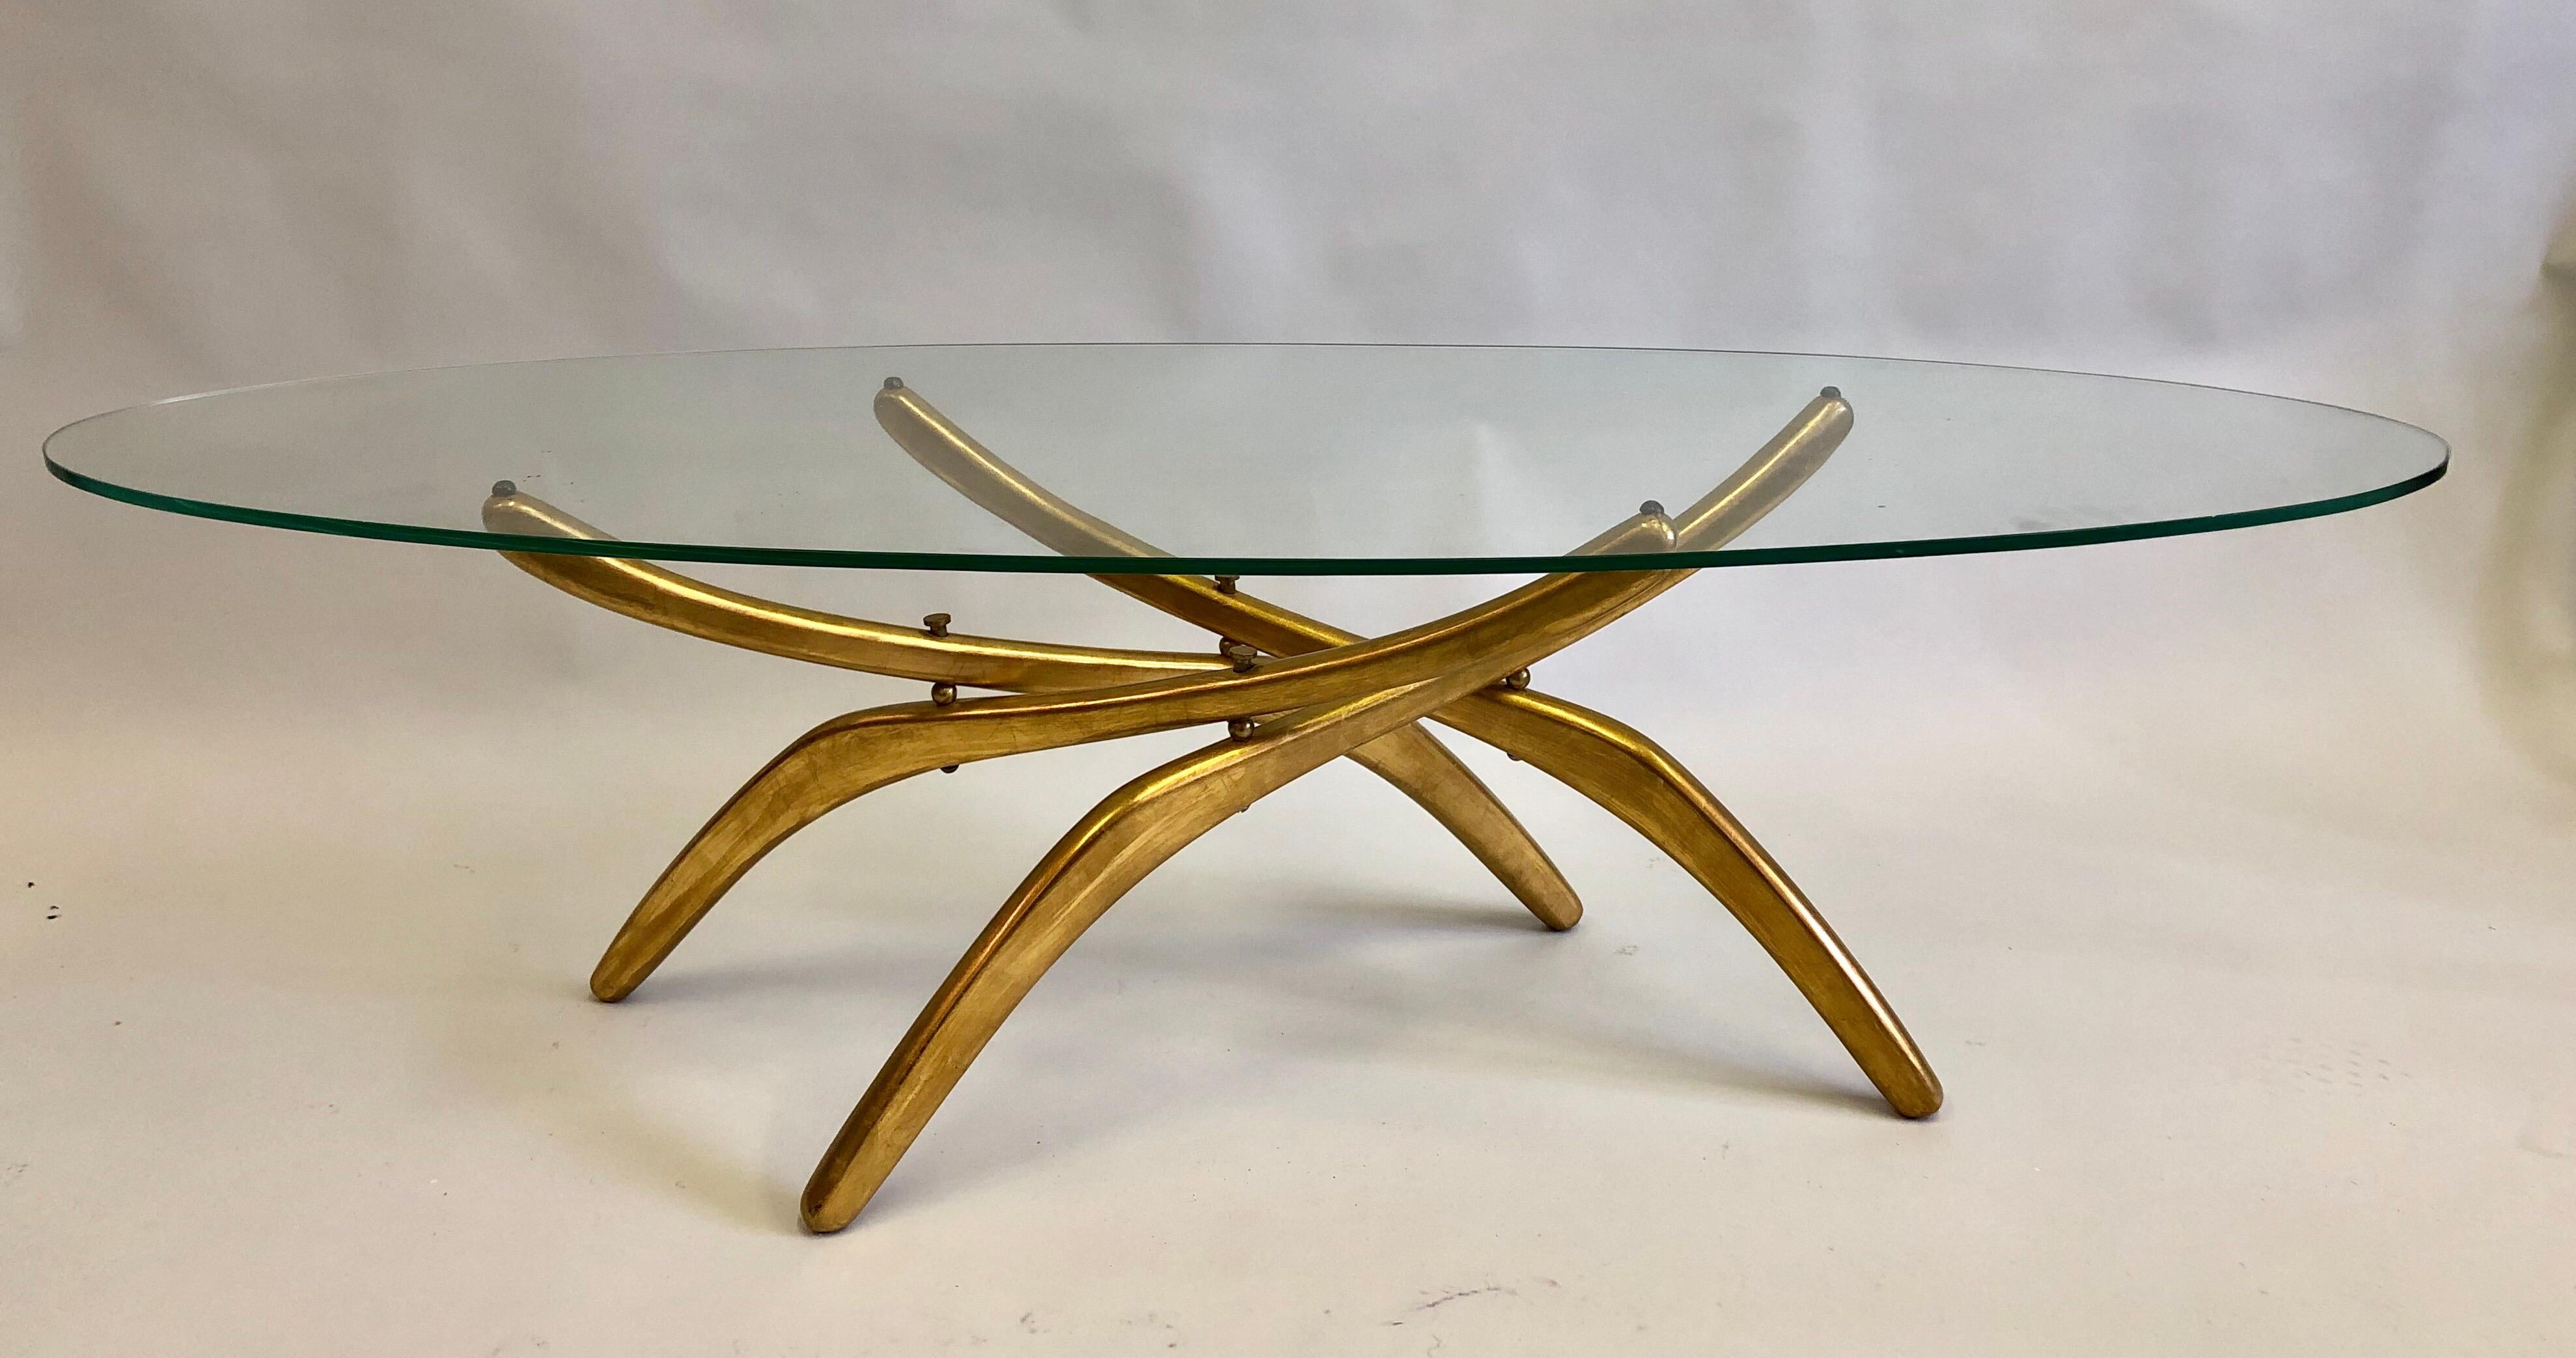 Important Italian Prototype Cocktail table Attributed to Carlo Mollino carved from wood and gilt to resemble metal. The table legs and spine resemble an insect such as an arachnid / spider. While maintaining a distinct modern look and feel. 

The